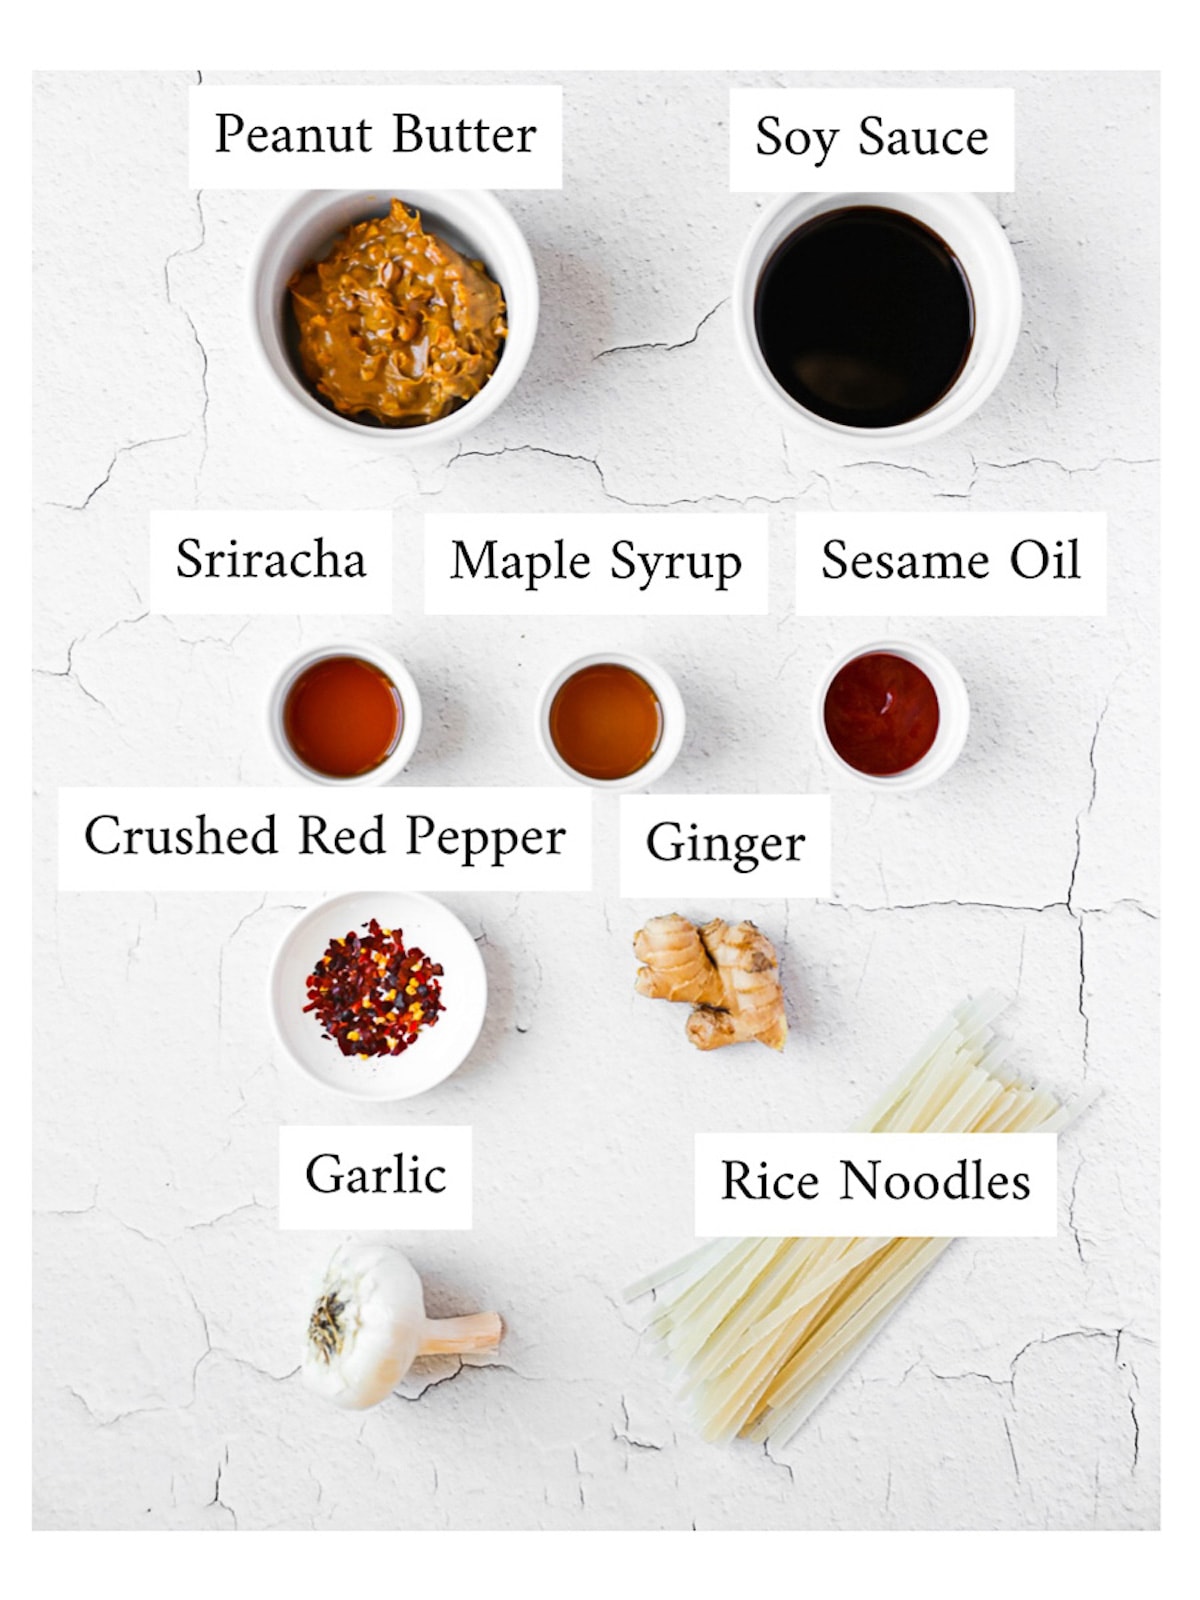 Labeled ingredients in small white bowls and on a white background including: peanut butter, soy sauce, sriracha, maple syrup, sesame oil, crushed red pepper, ginger, garlic, and rice noodles.